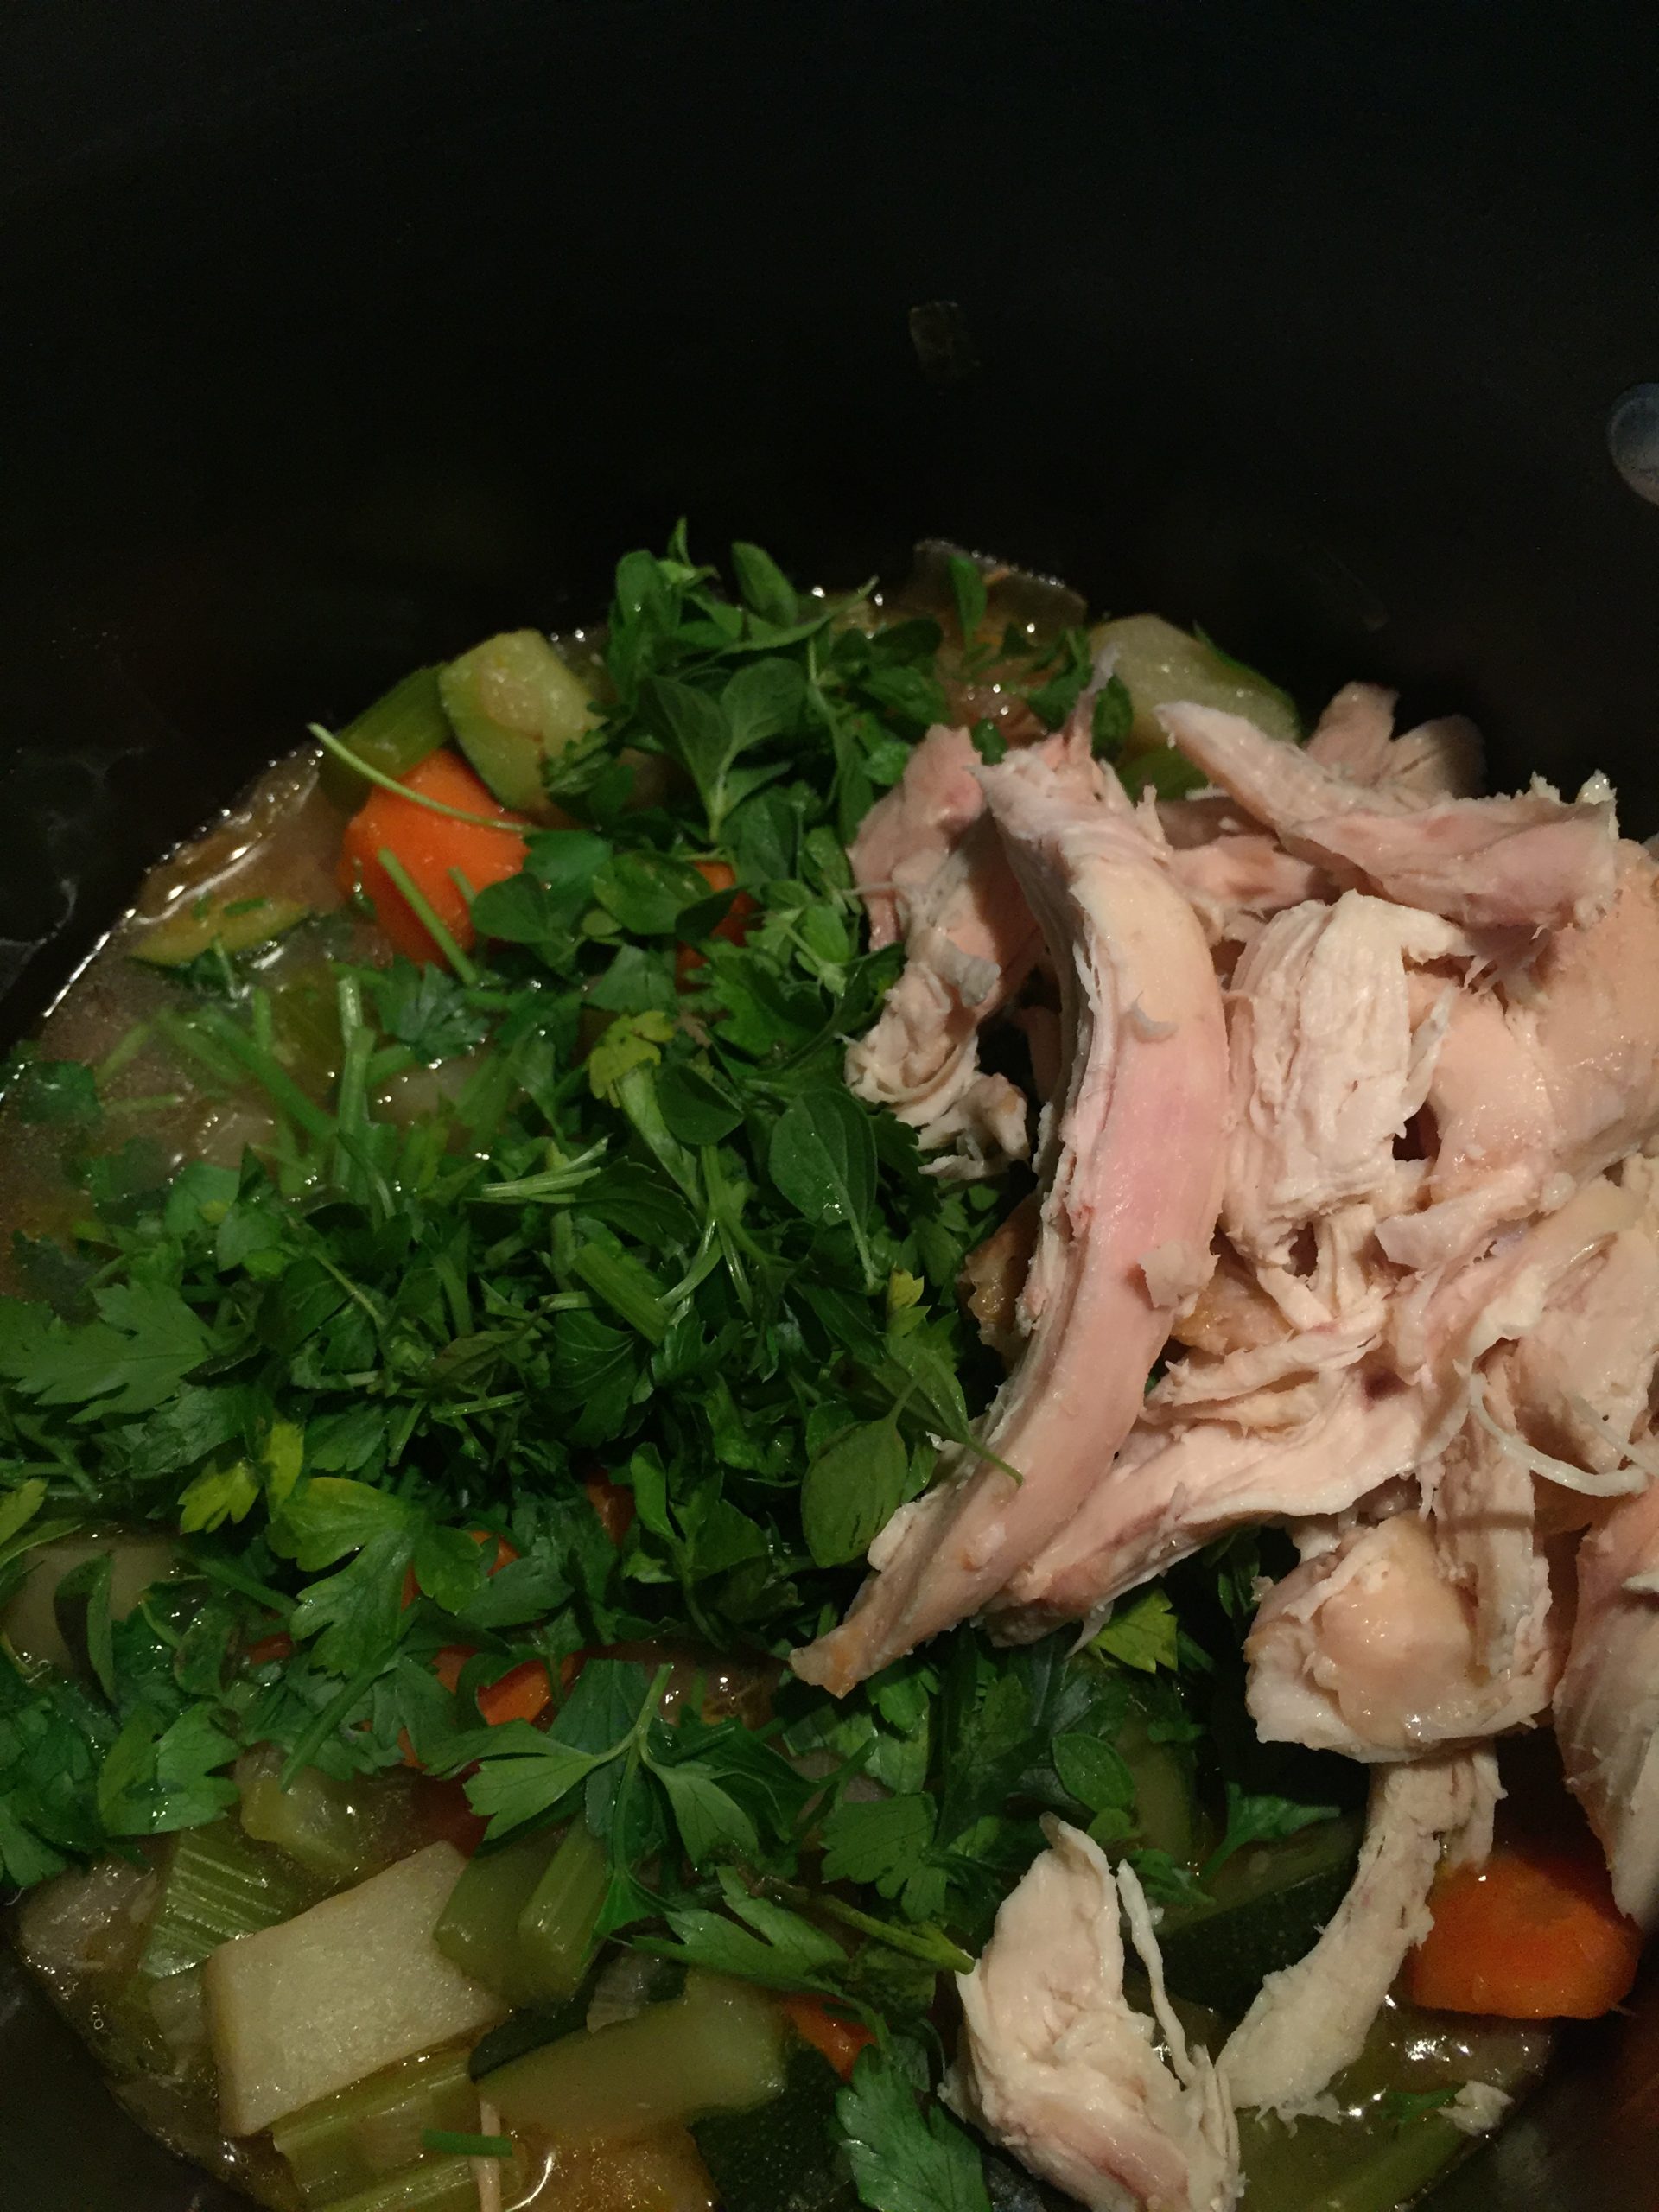 Add chopped herbs to chicken and vegetable soup right before serving